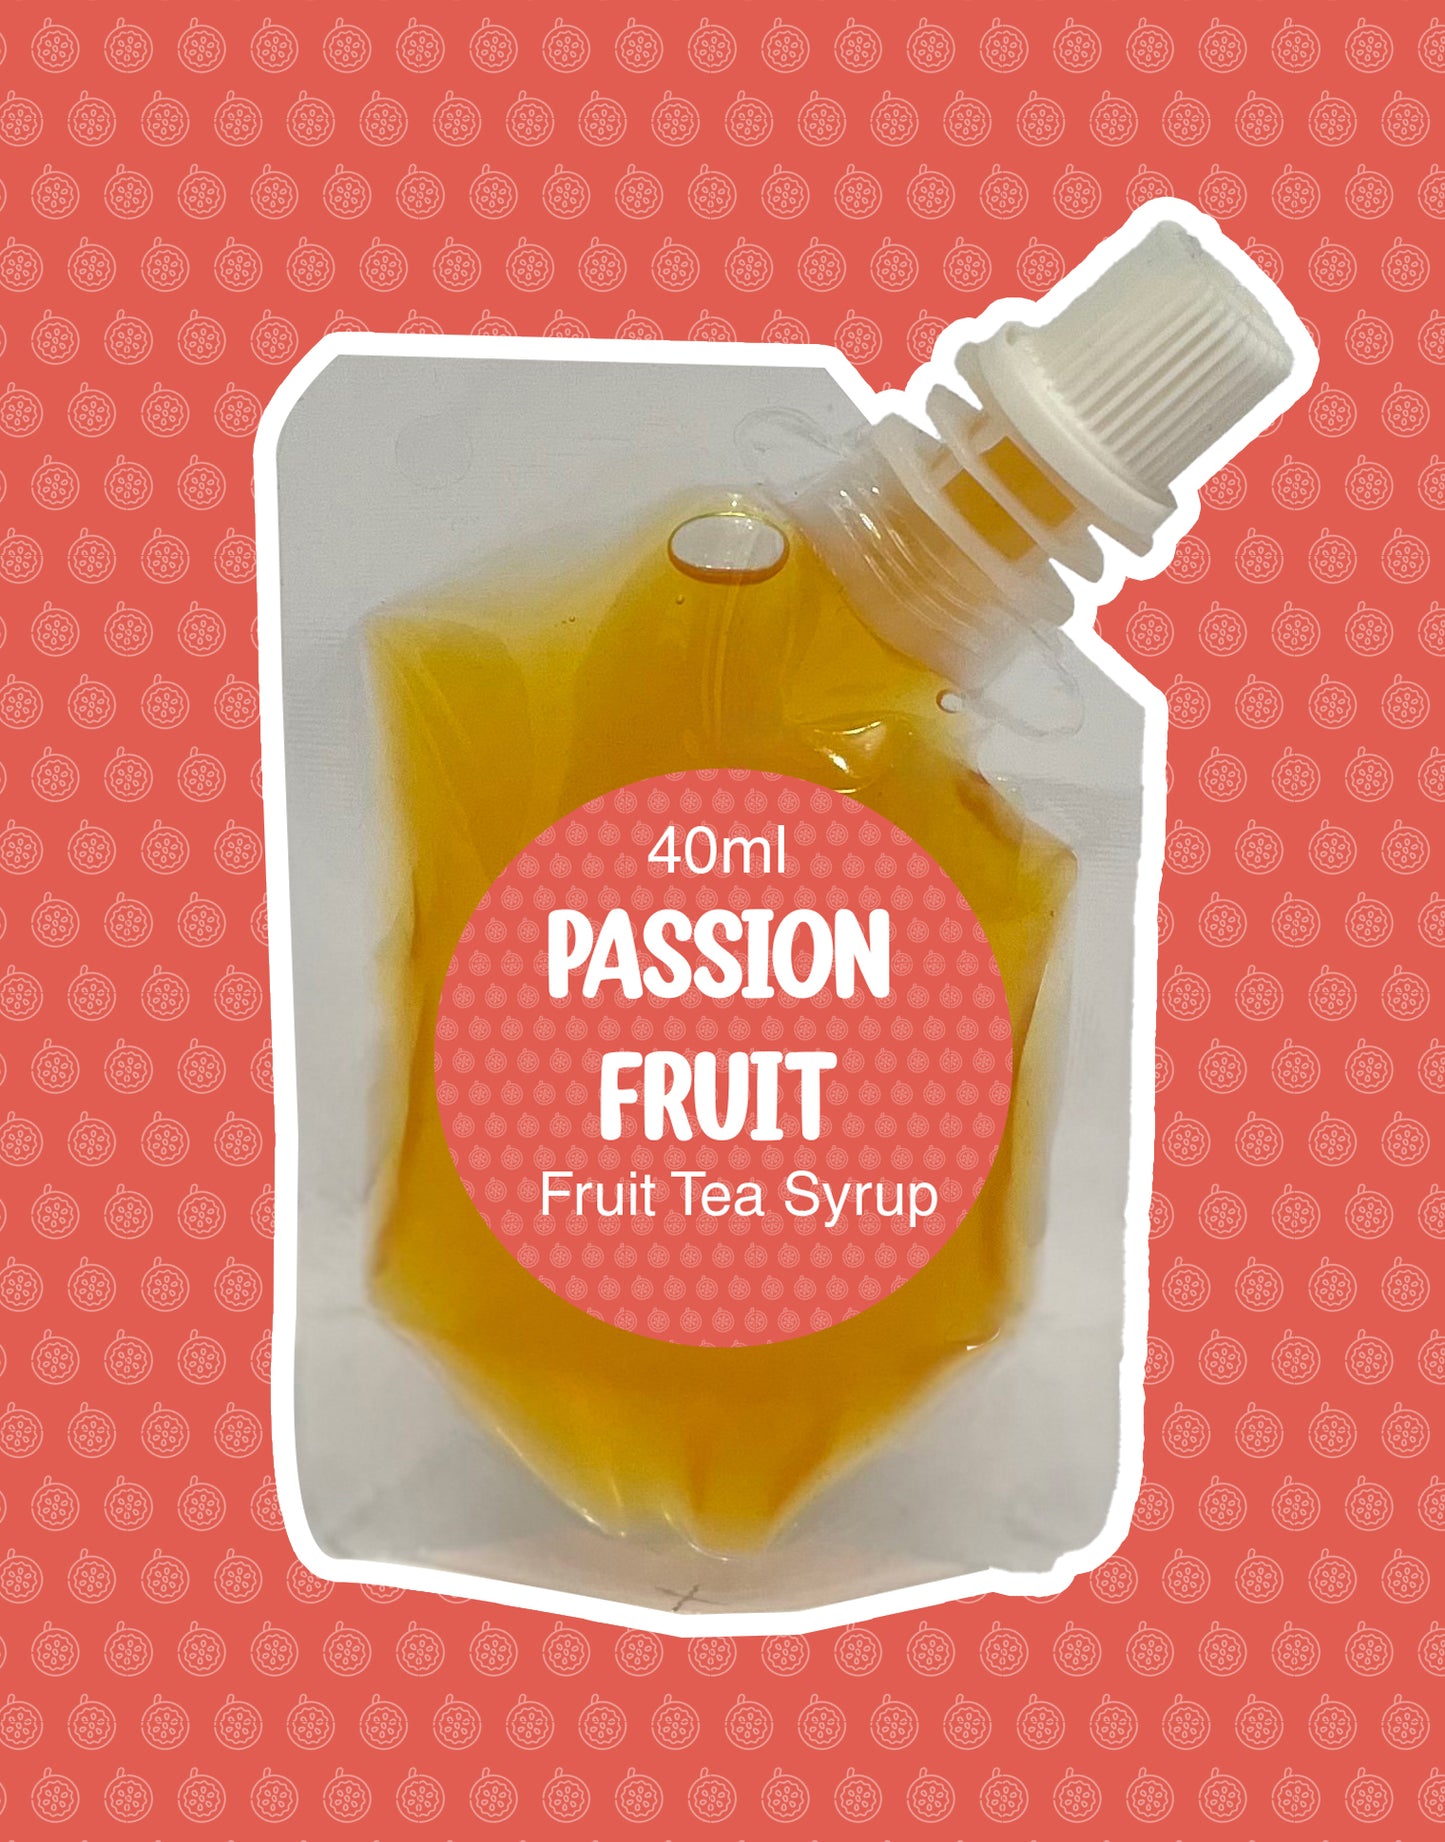 Passion Fruit Tea Syrup 40ml